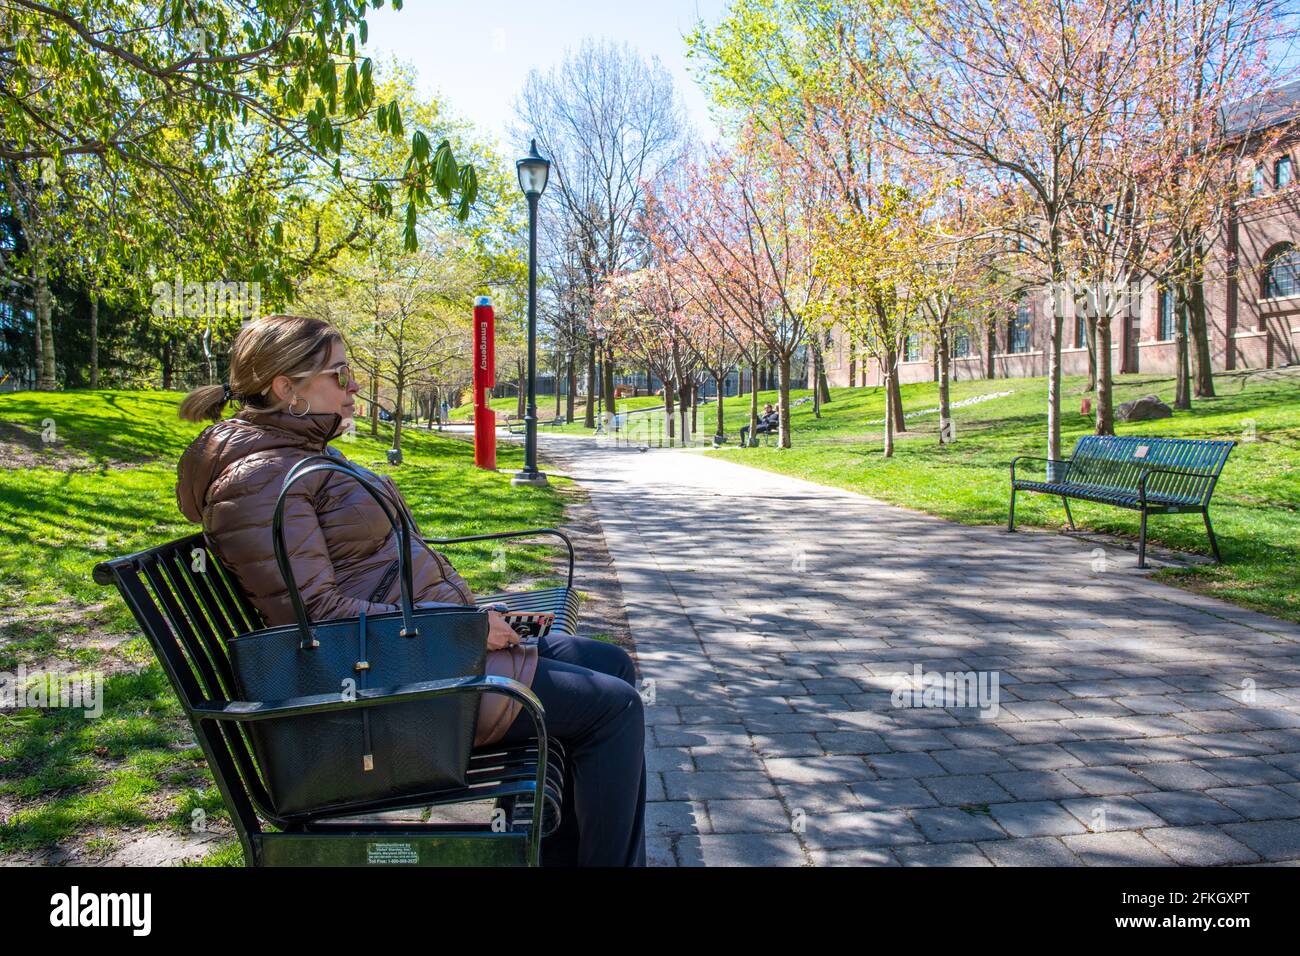 The 'Philosopher's Walk' in Toronto downtown, Canada. The park is a famous place and a tourist attraction. Stock Photo